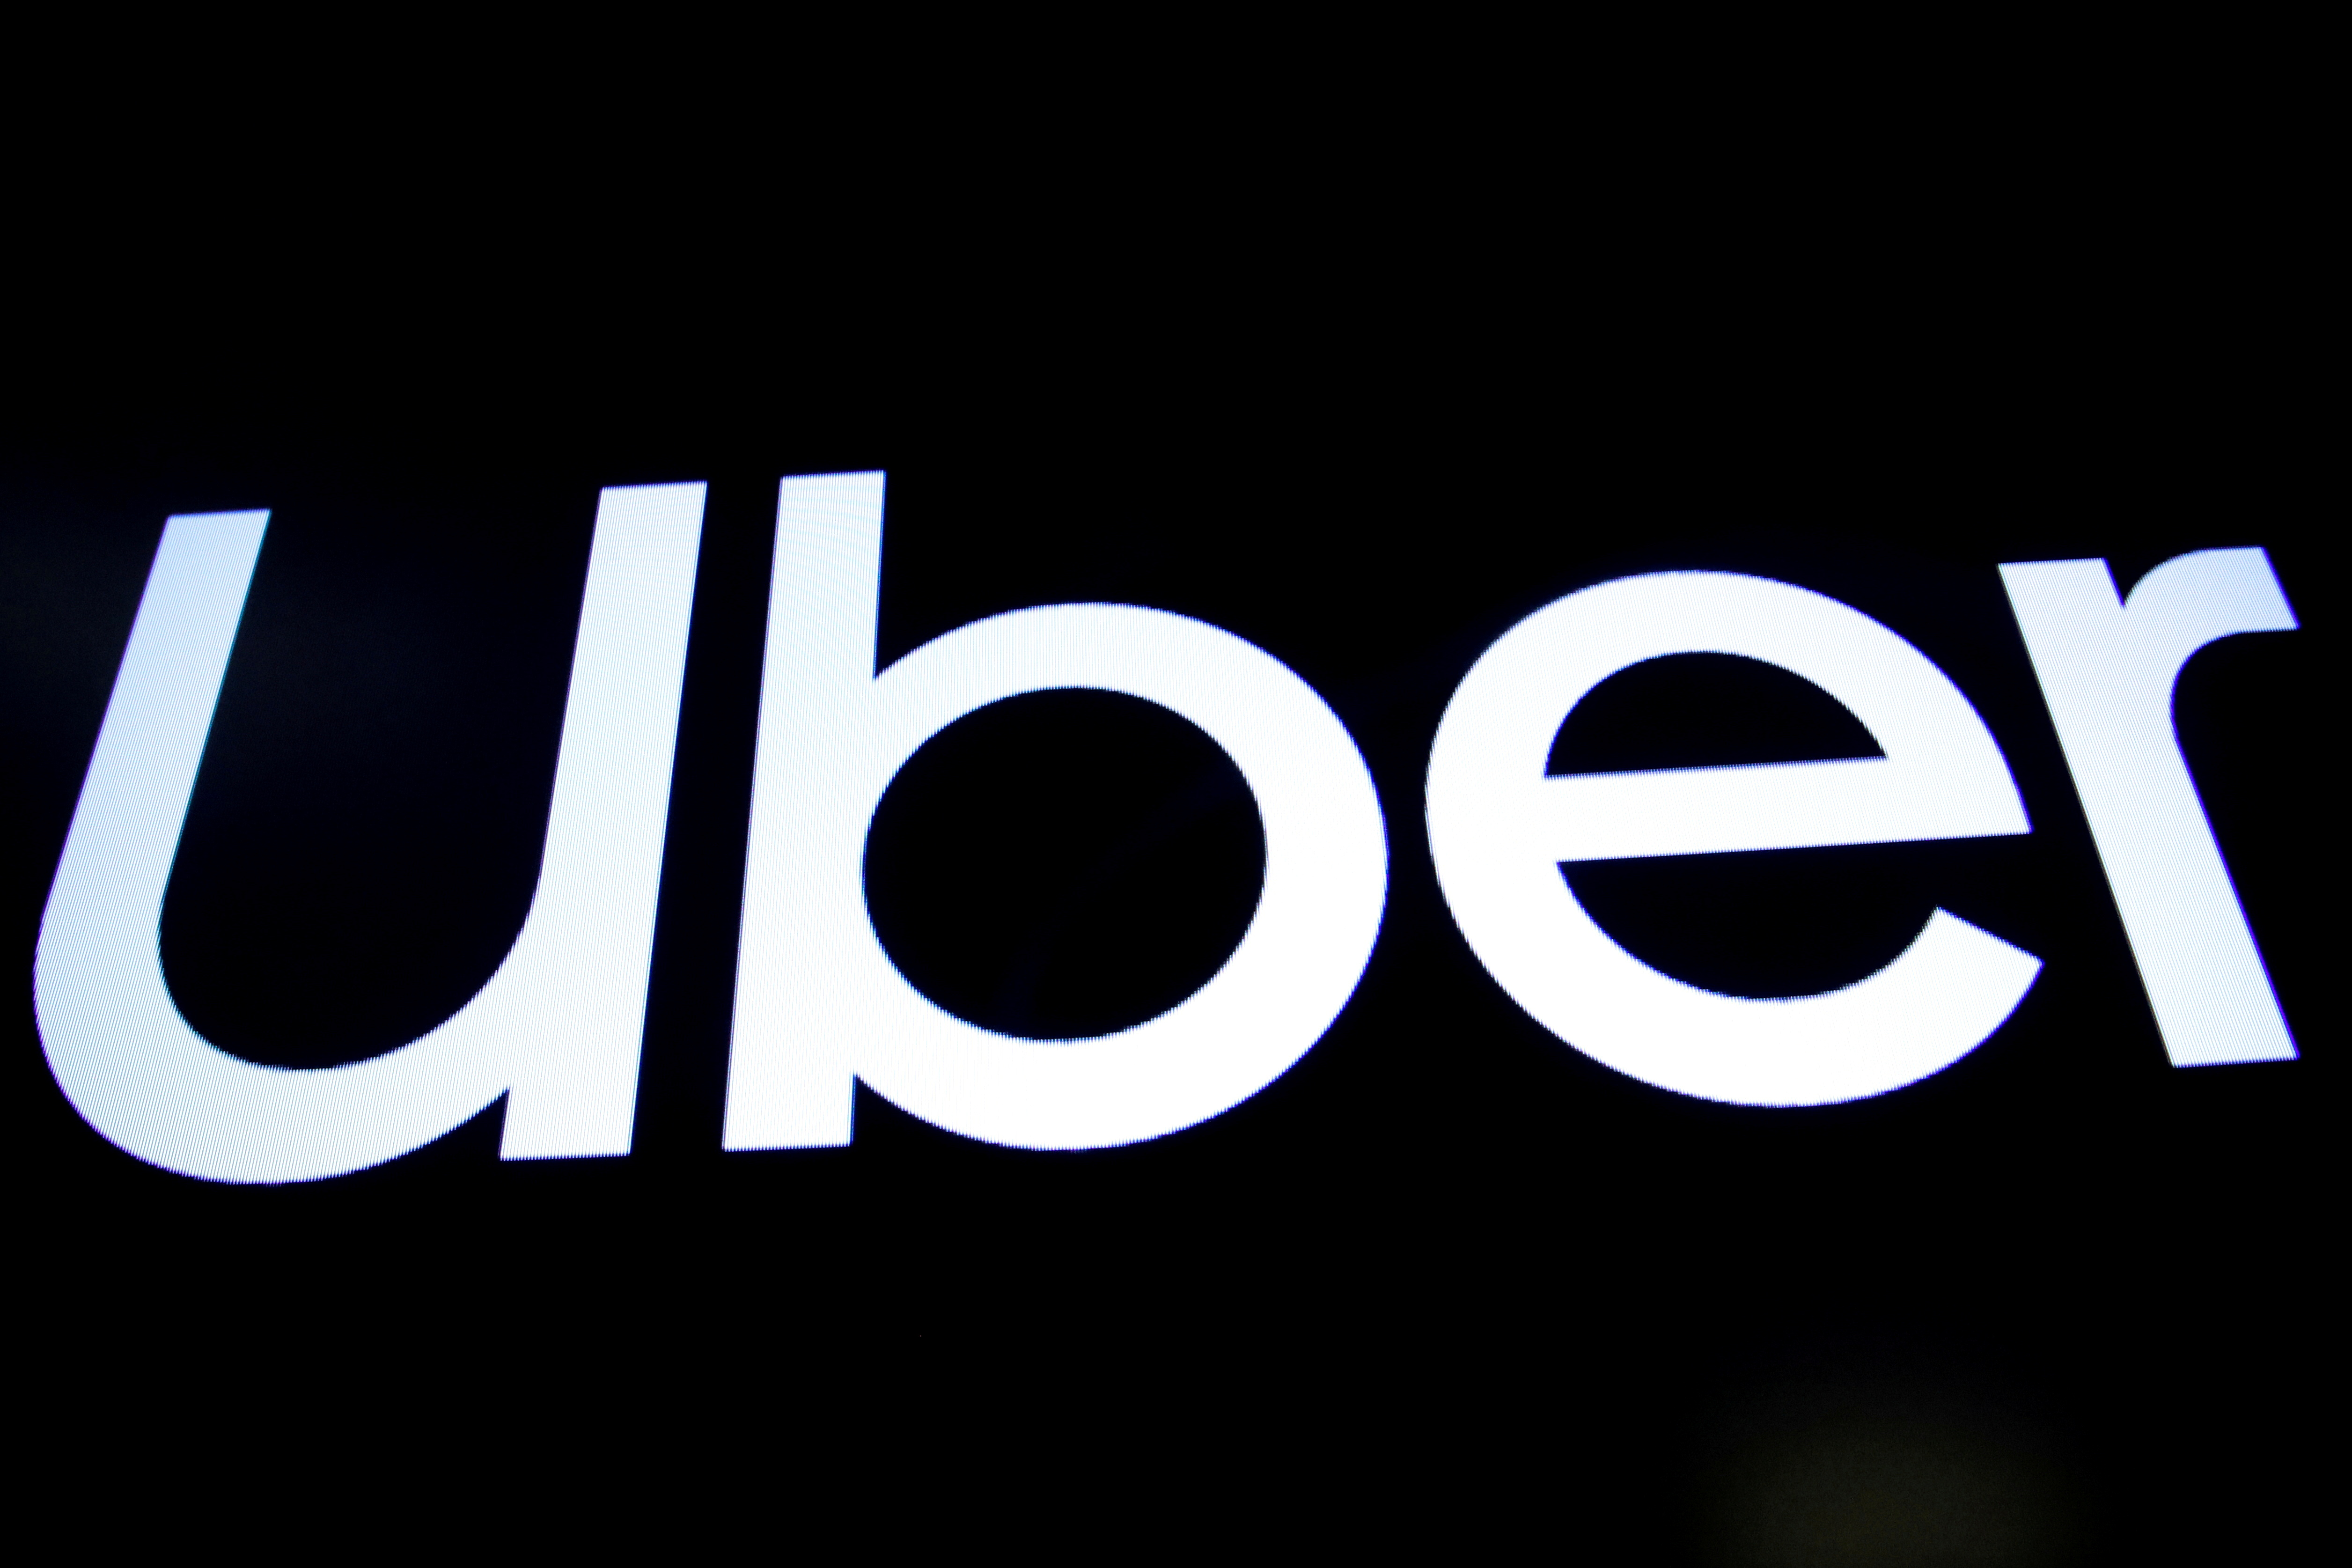 A screen displays the company logo of Uber Technologies Inc in New York